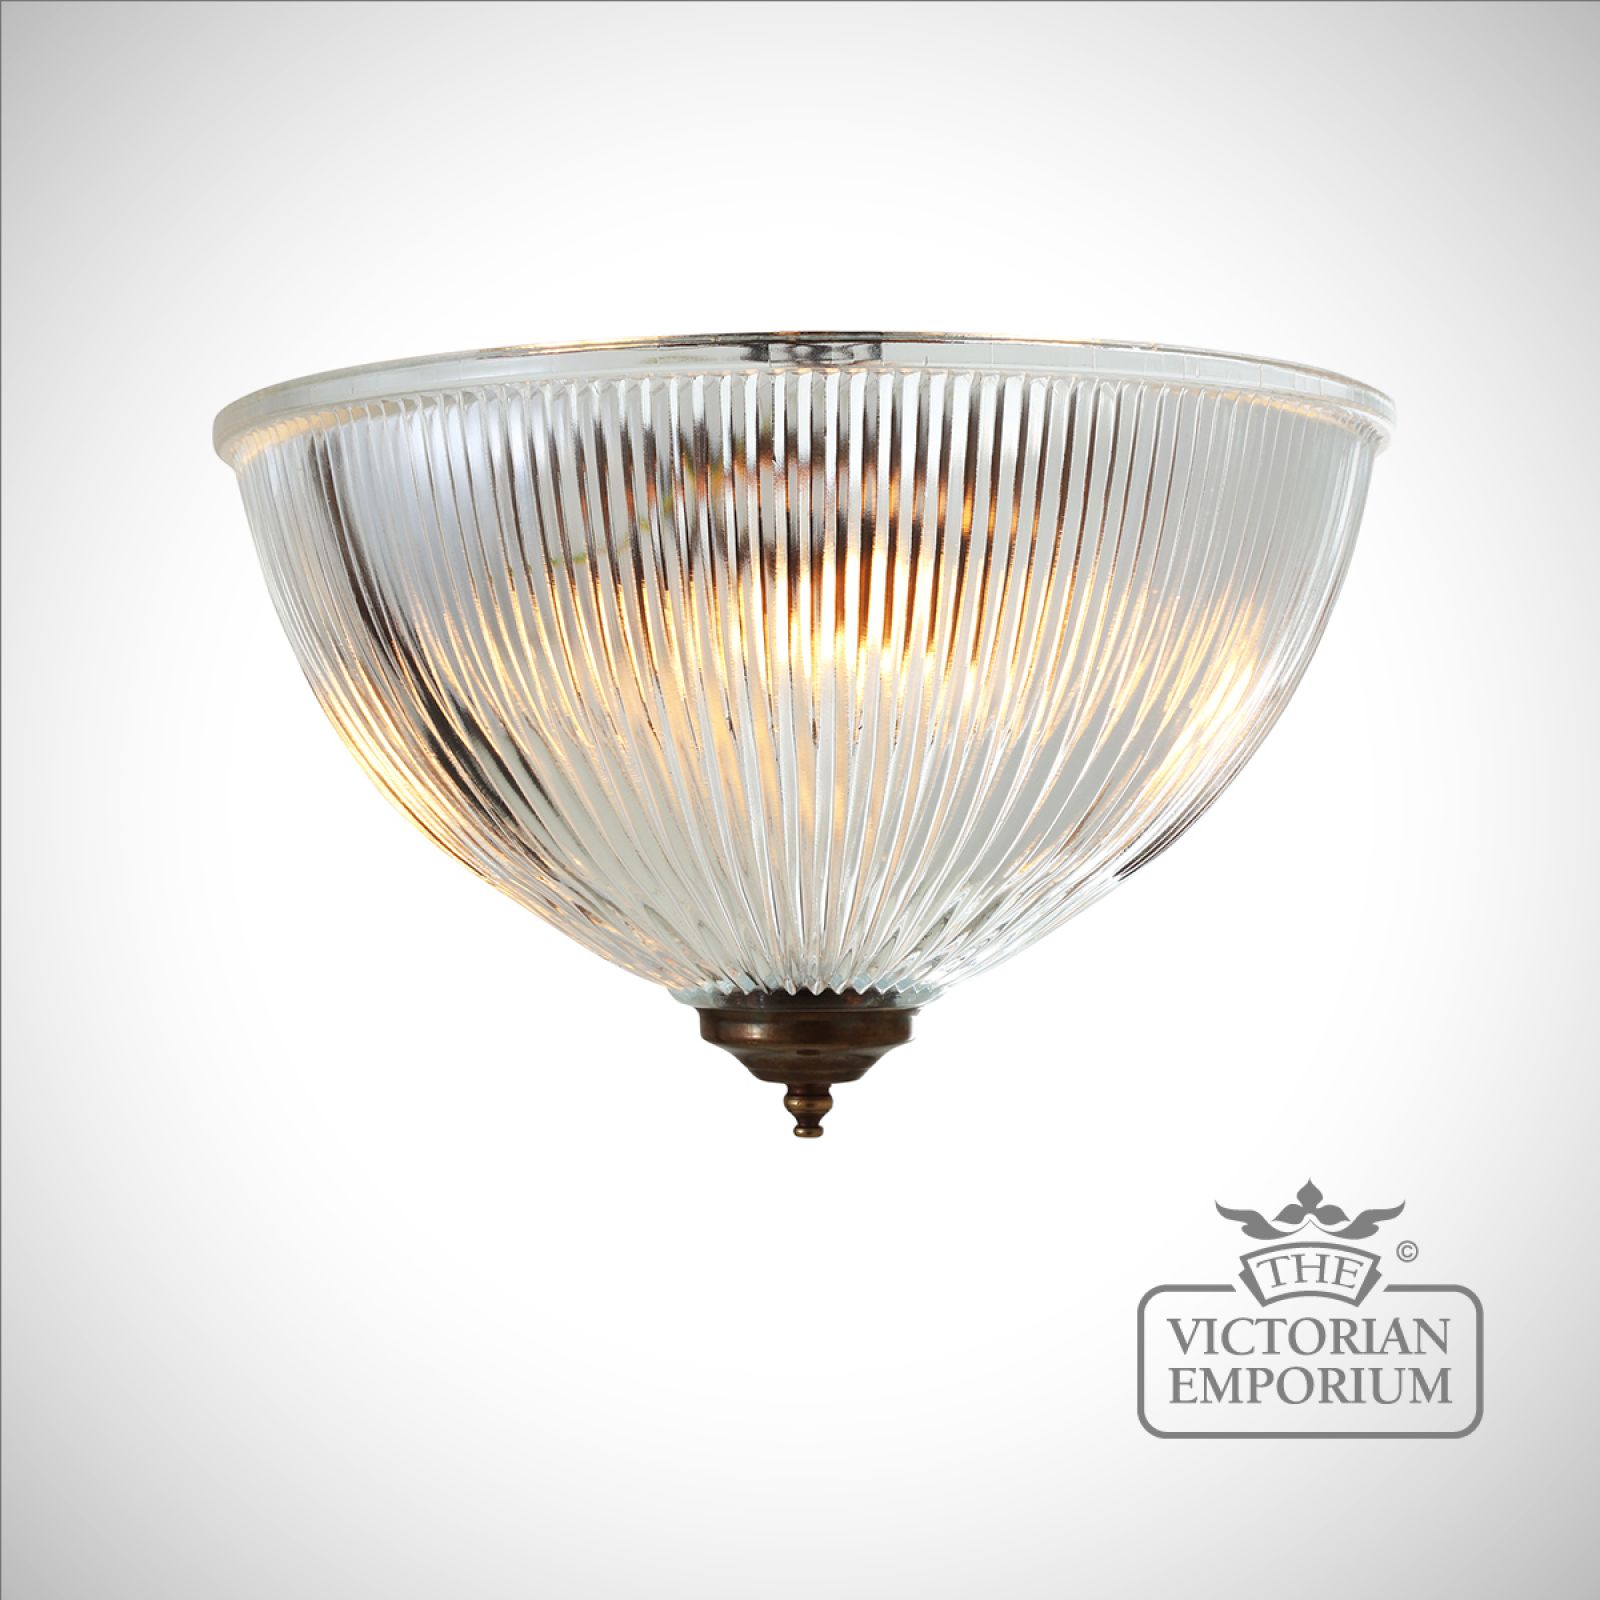 Moronie Flush Mount Ceiling Light in a choice of finishes